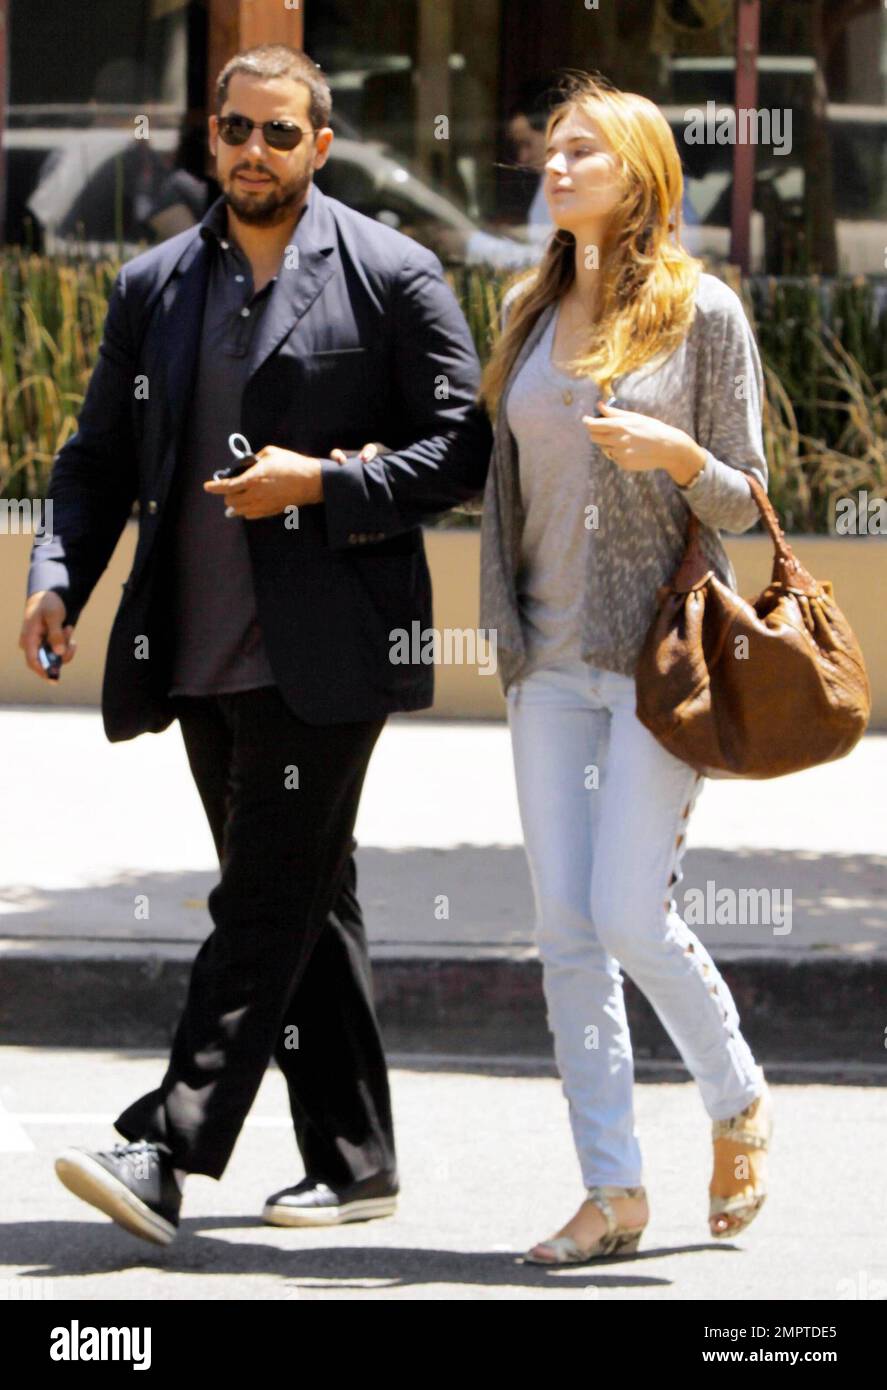 Illusionist David Blaine and reported fiance, French model Alizee Guinochet walk arm-in-arm as they leave The Newsroom after having a quiet lunch together in Los Angeles, CA. 8/13/10. Stock Photo